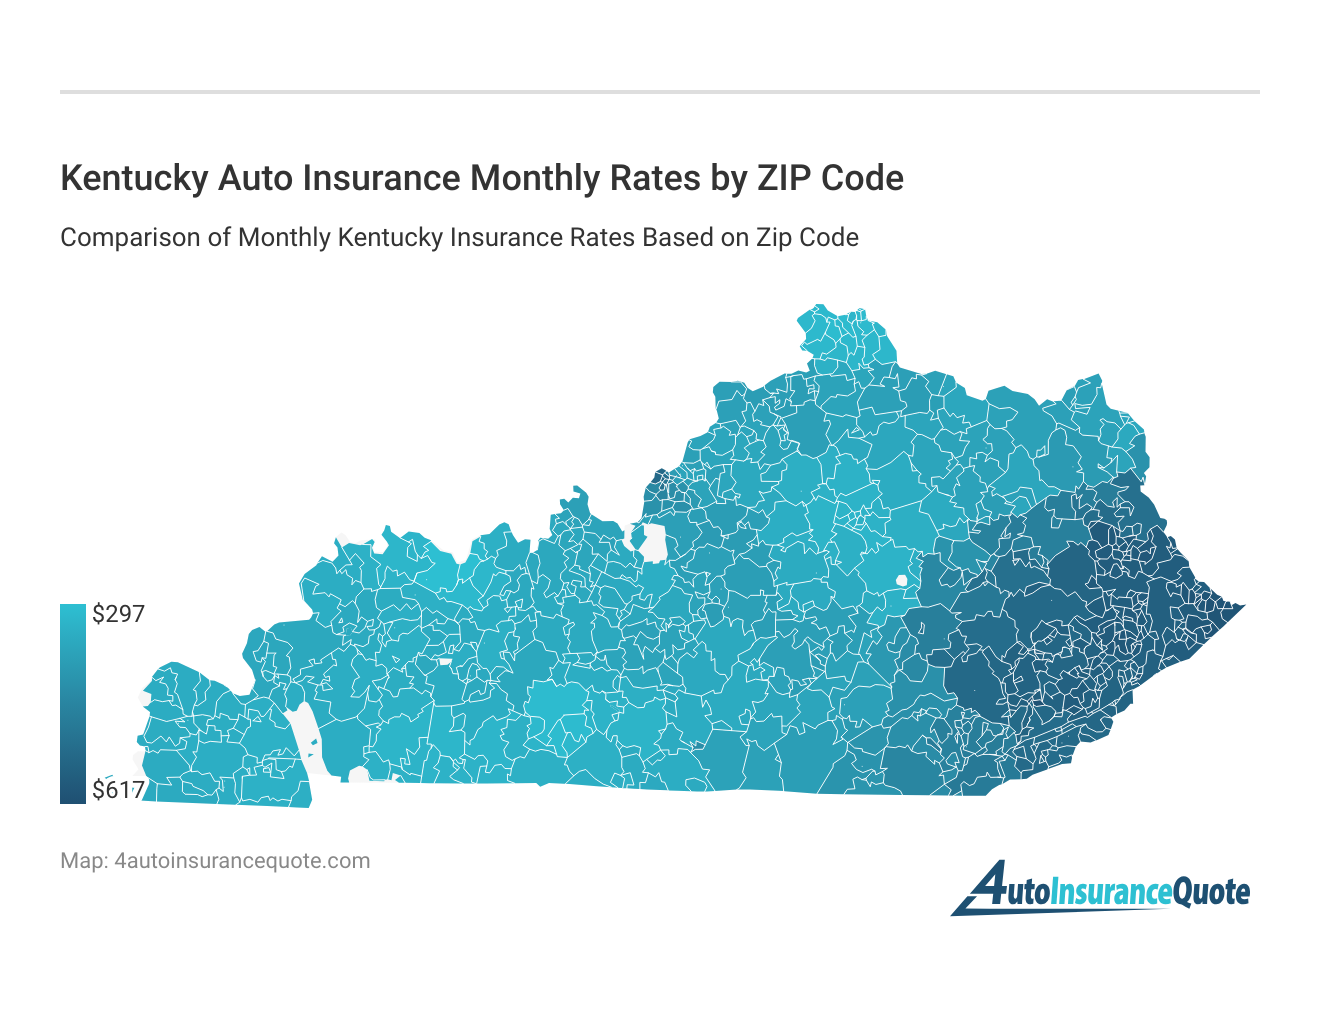 <h3>Kentucky Auto Insurance Monthly Rates by ZIP Code</h3>